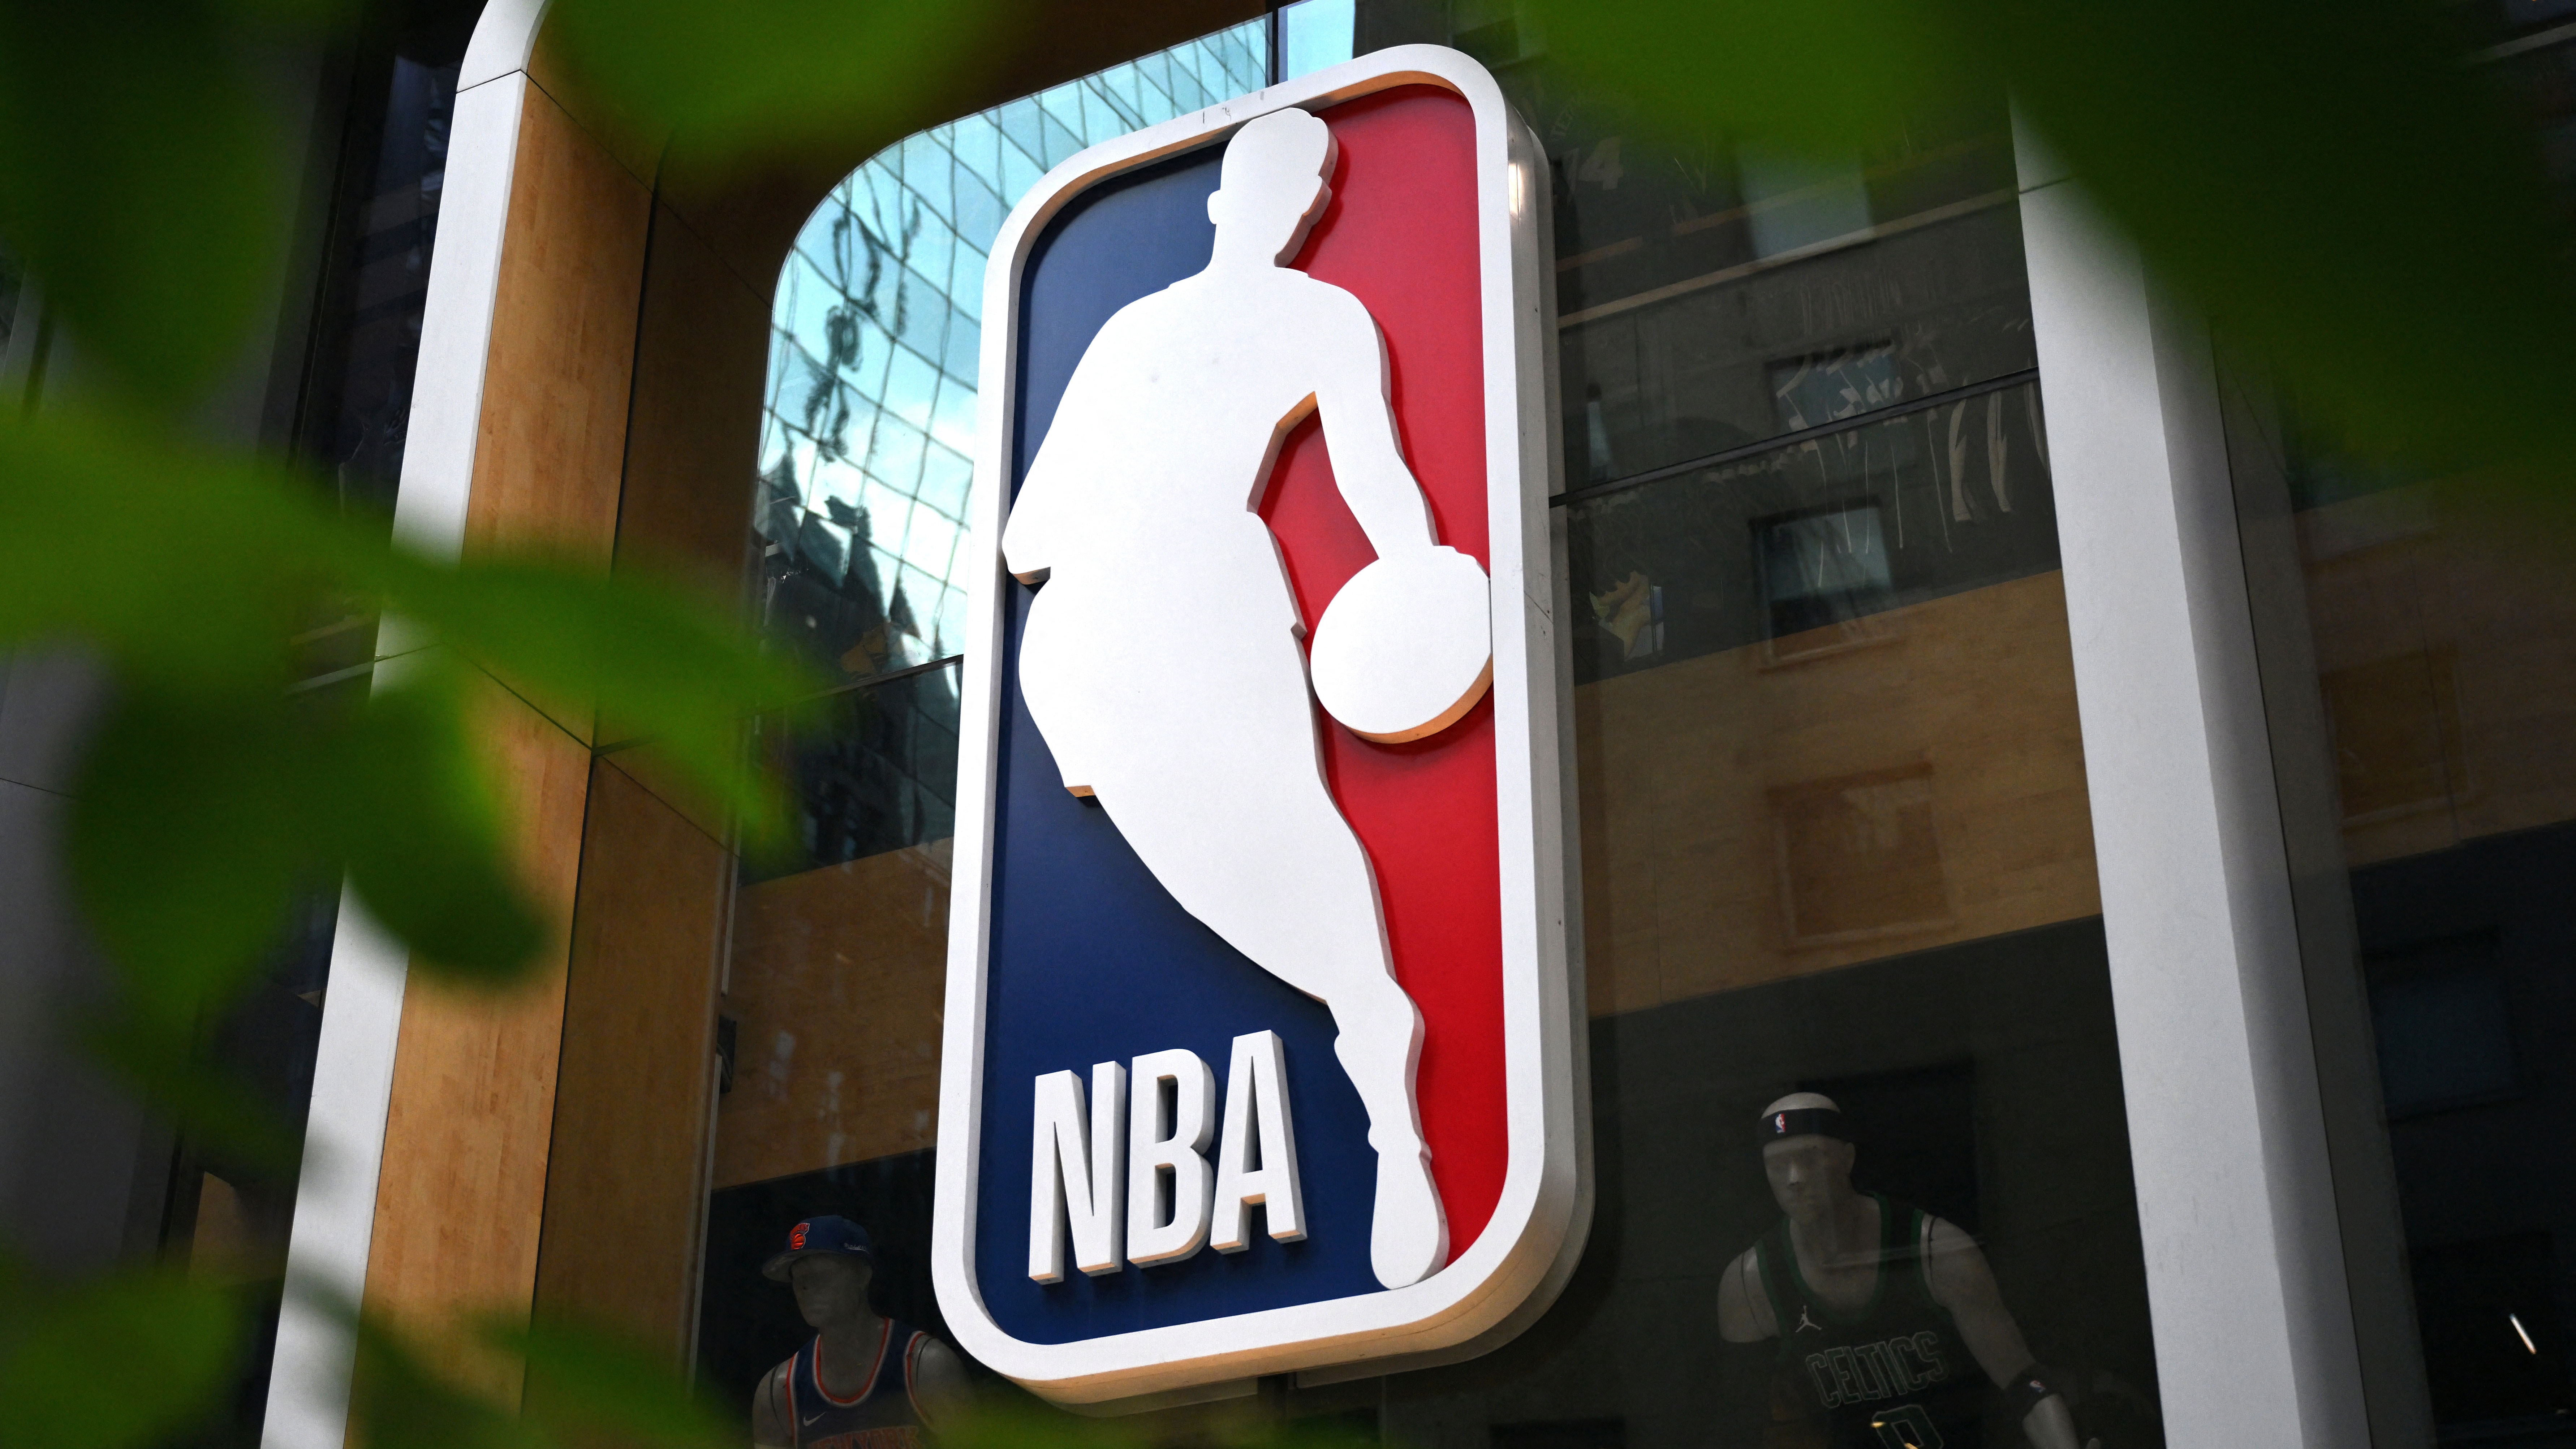 Here's what you need to know about NBA's reported 11-year, $76 billion media rights deal